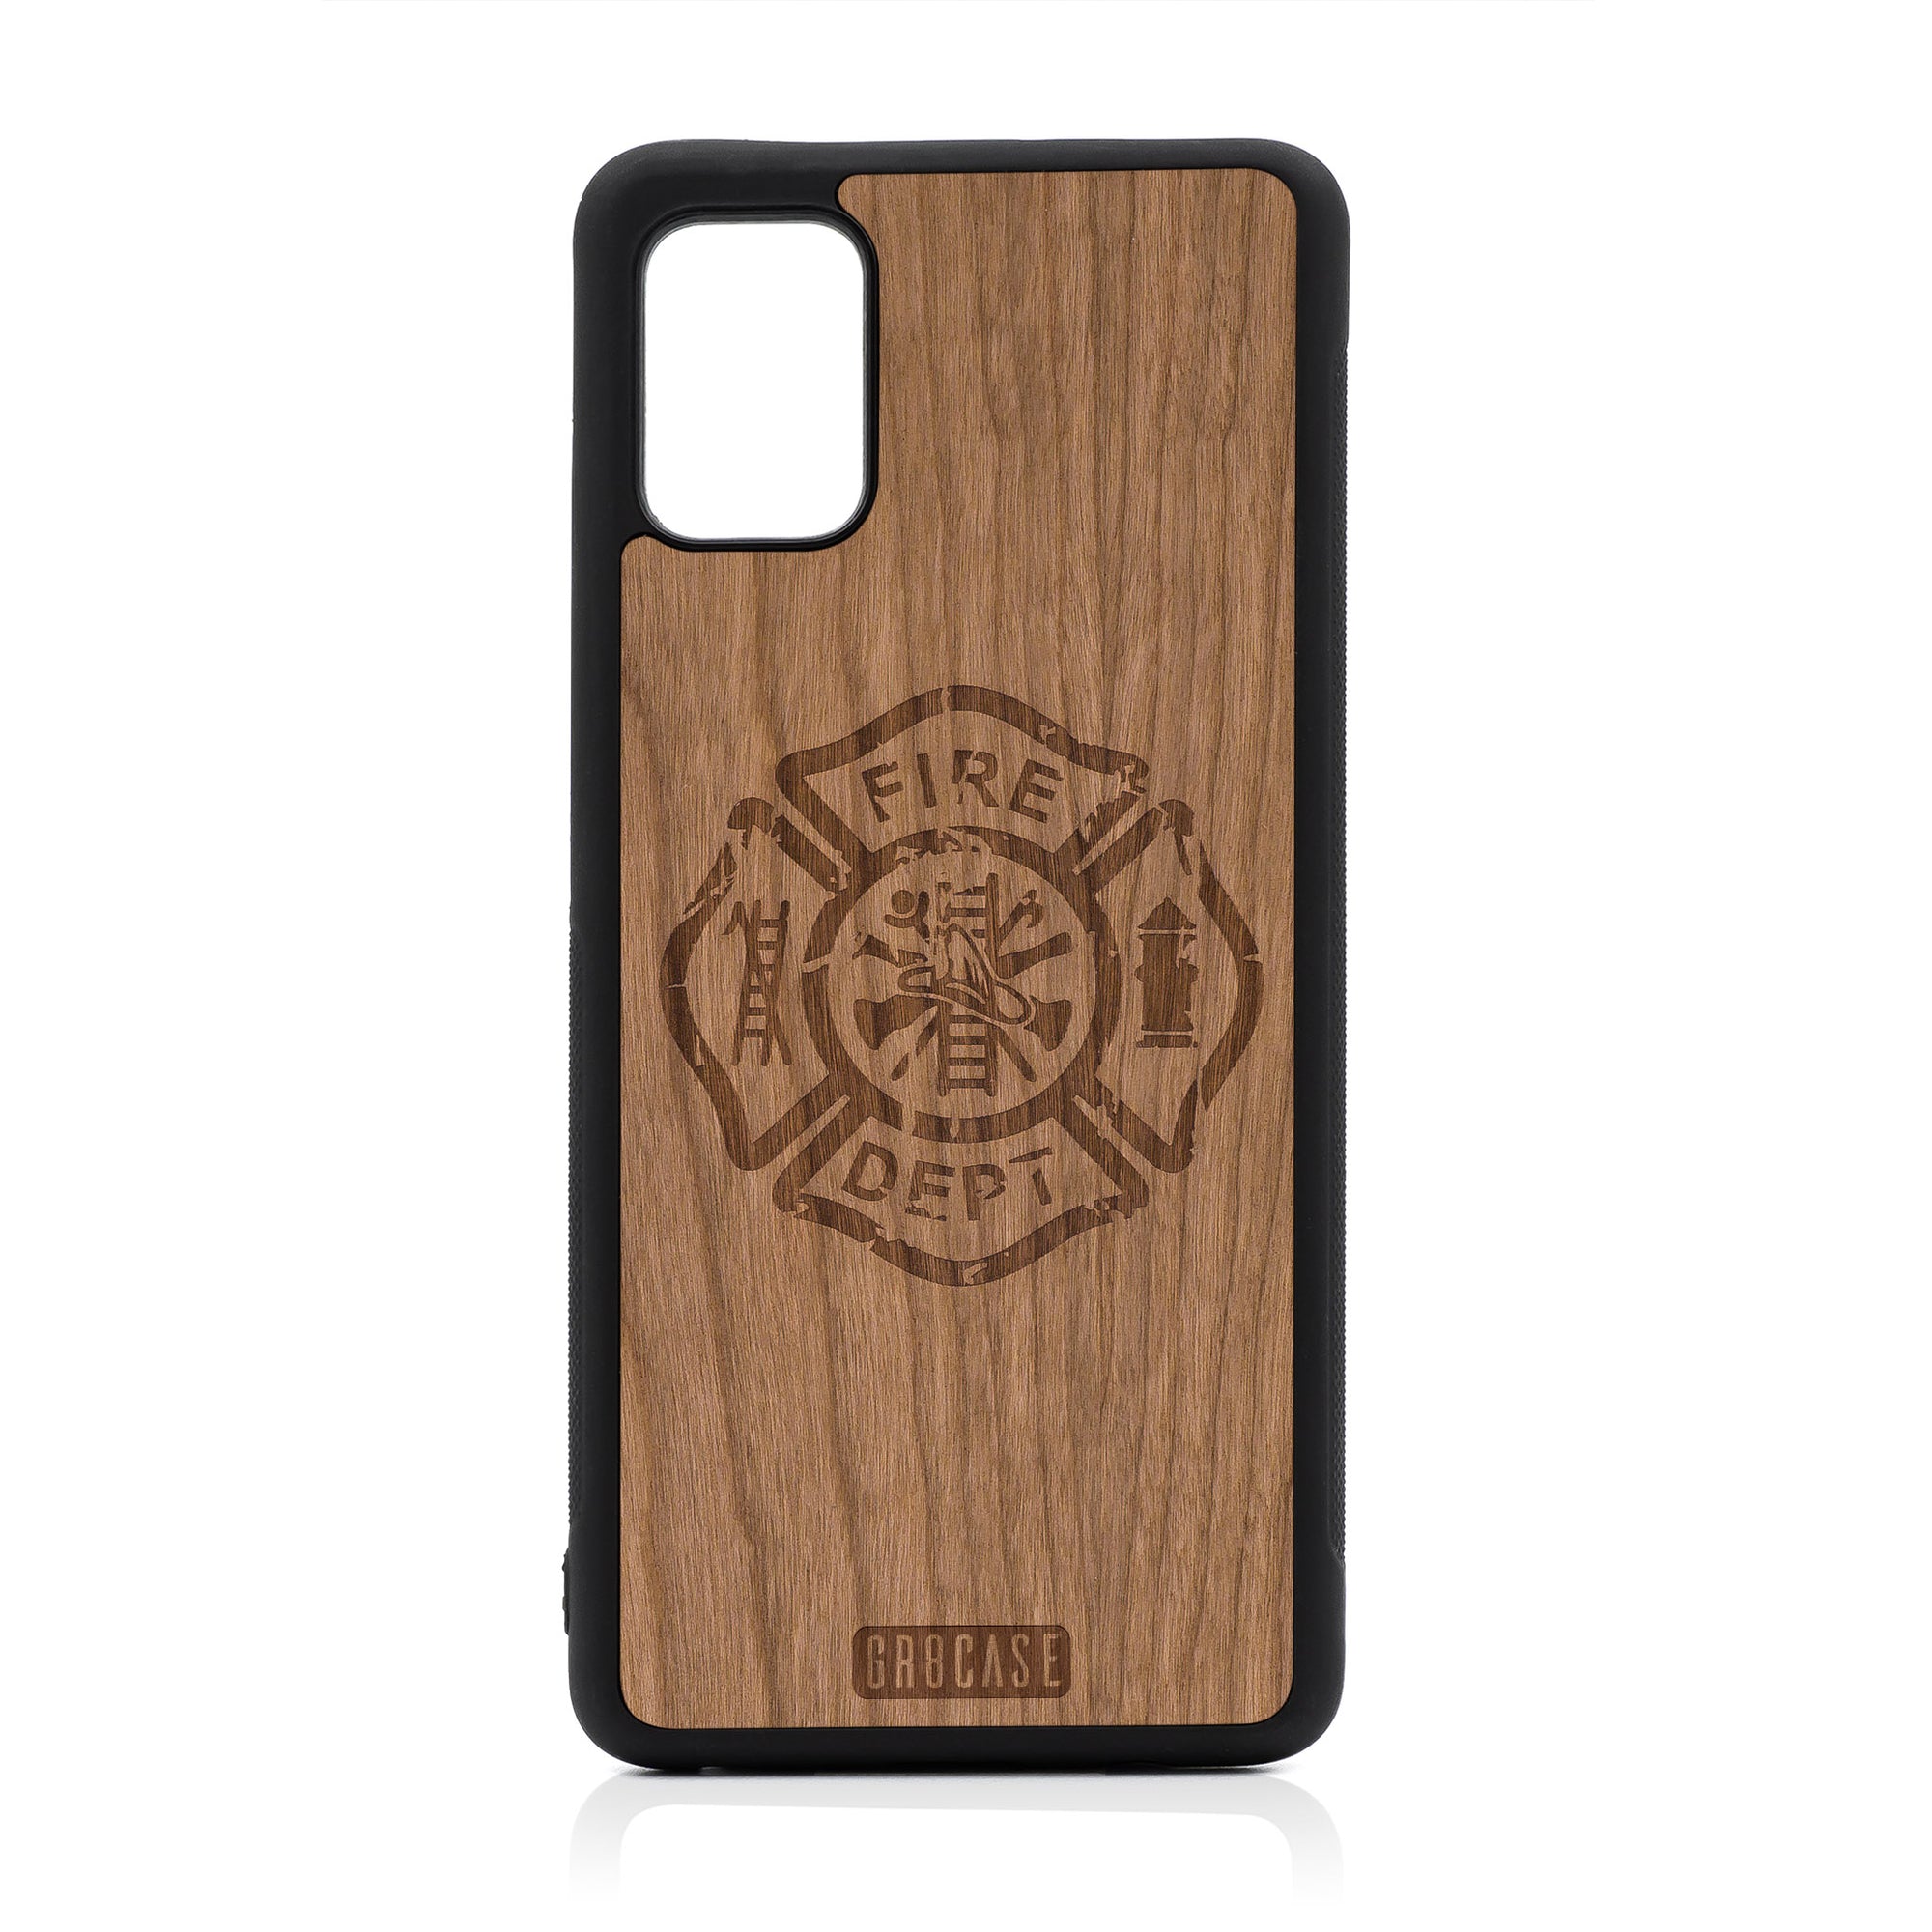 Fire Department Design Wood Case For Samsung Galaxy A51-5G